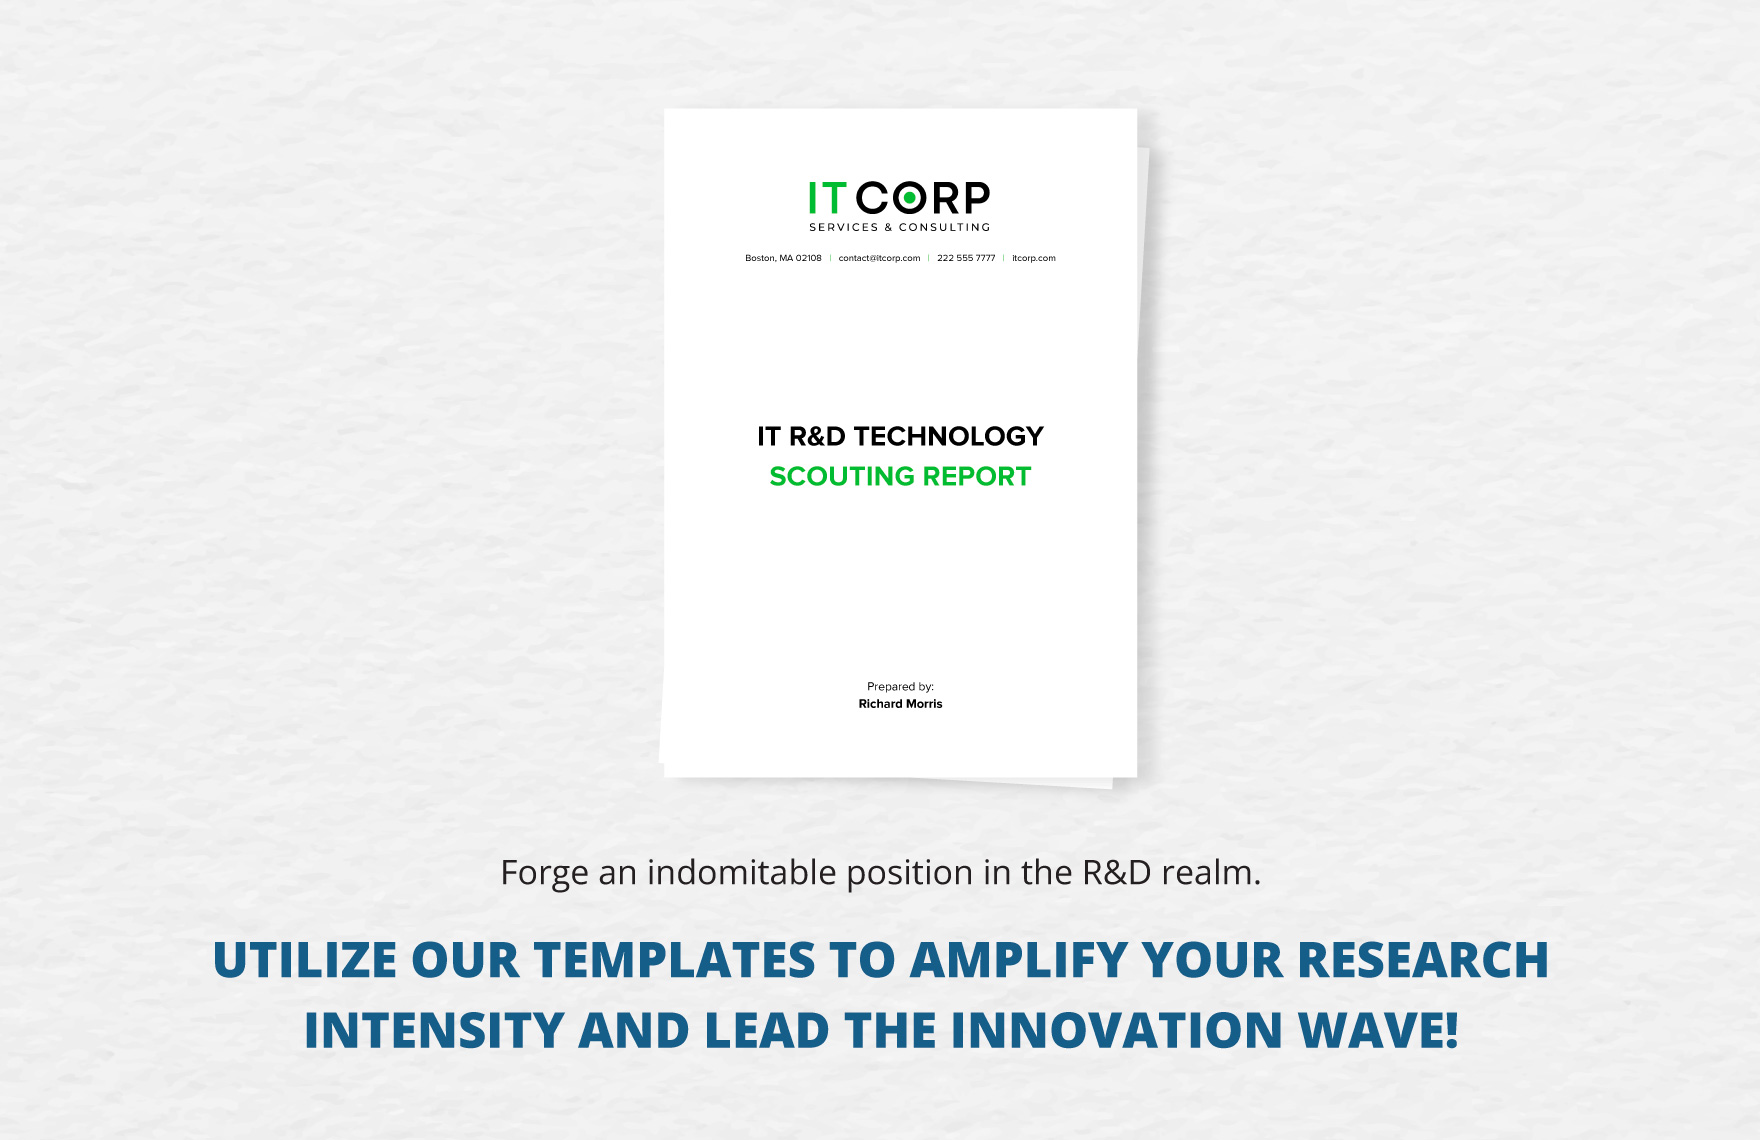 IT R&D Technology Scouting Report Template